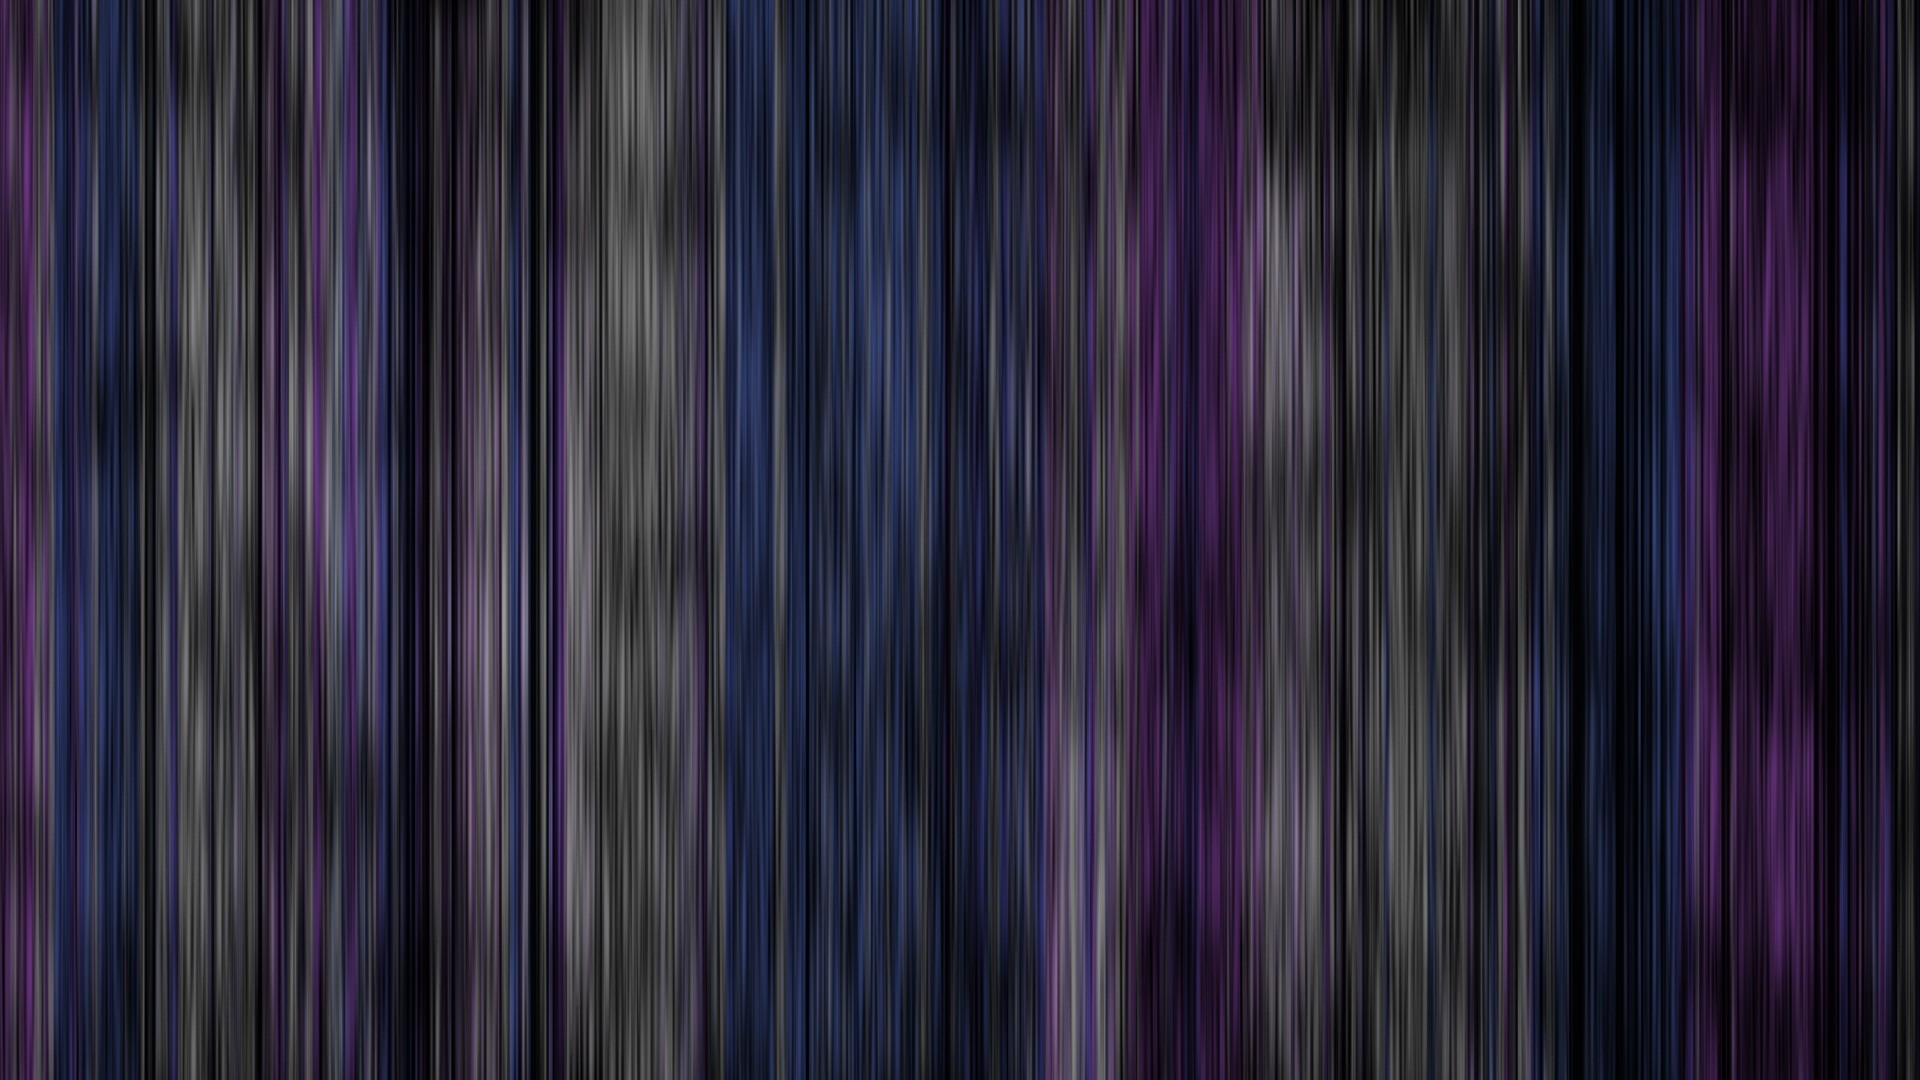 1920x1080 Wallpaper Abstraction, Purple, Grey, Stripes HD, Picture, Image | Epic Car  Wallpapers | Pinterest | Purple gray and Wallpaper